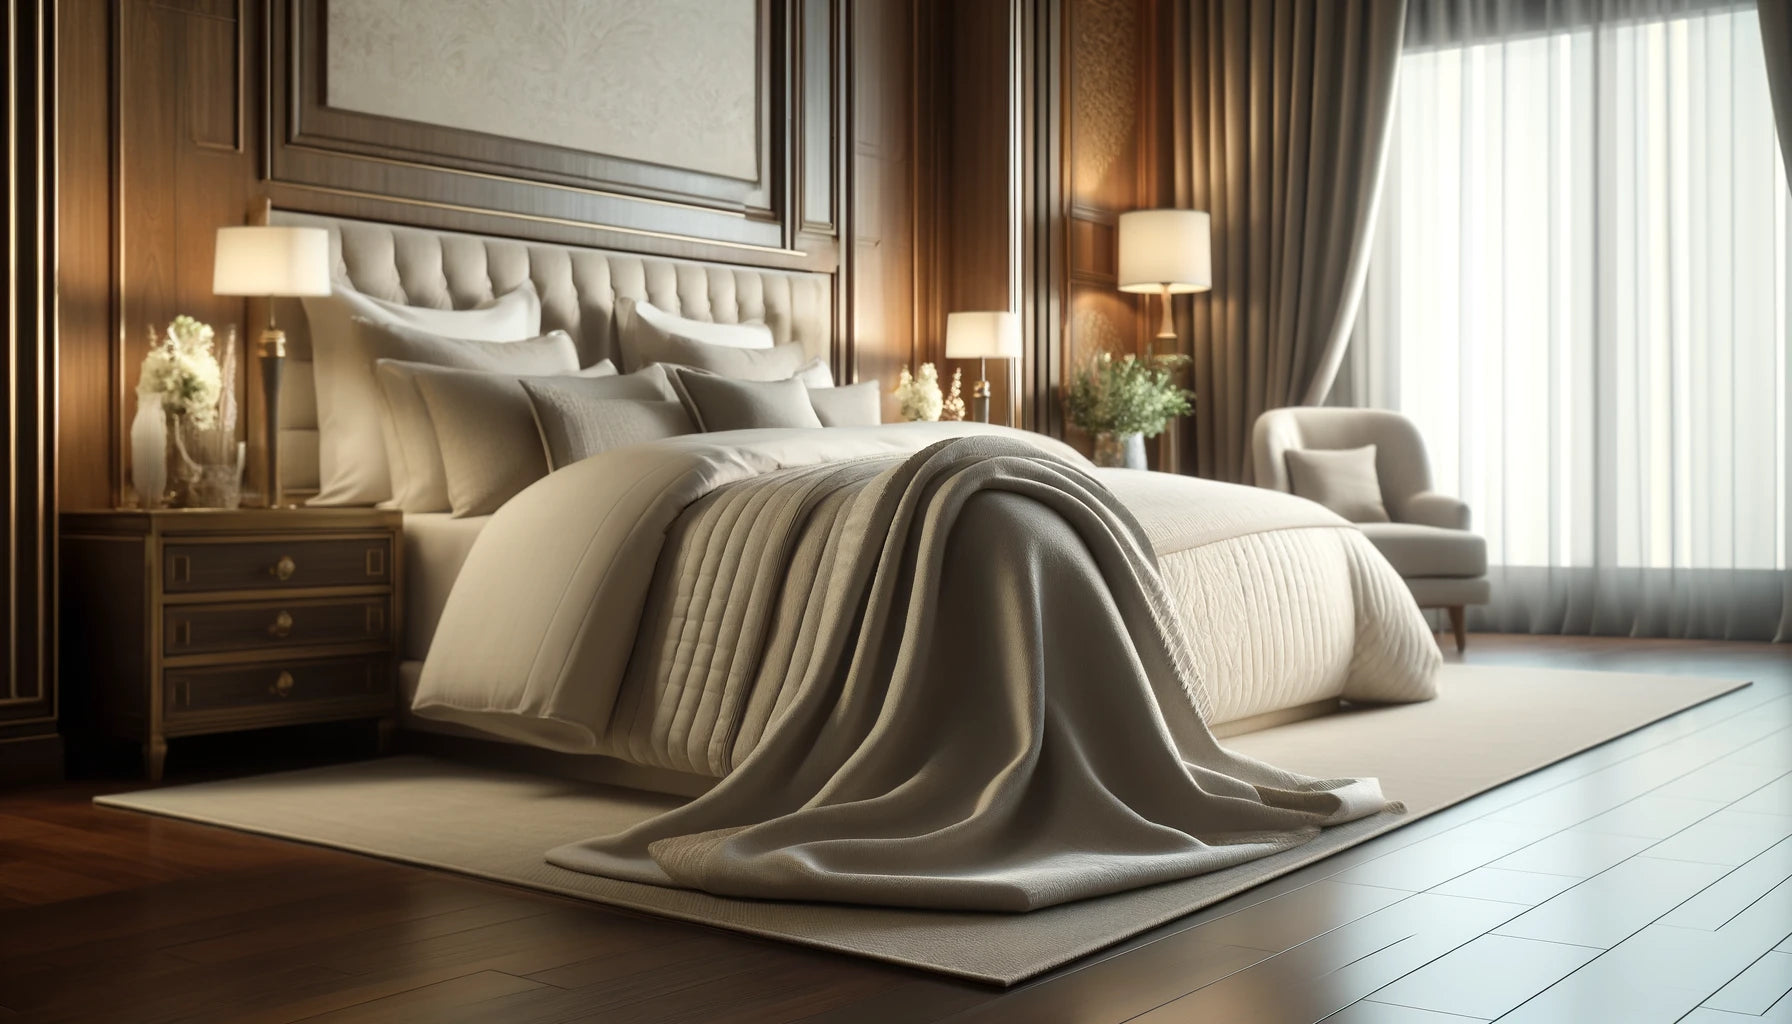 How to Fold a Blanket on a Bed: Enhancing Bedroom Elegance